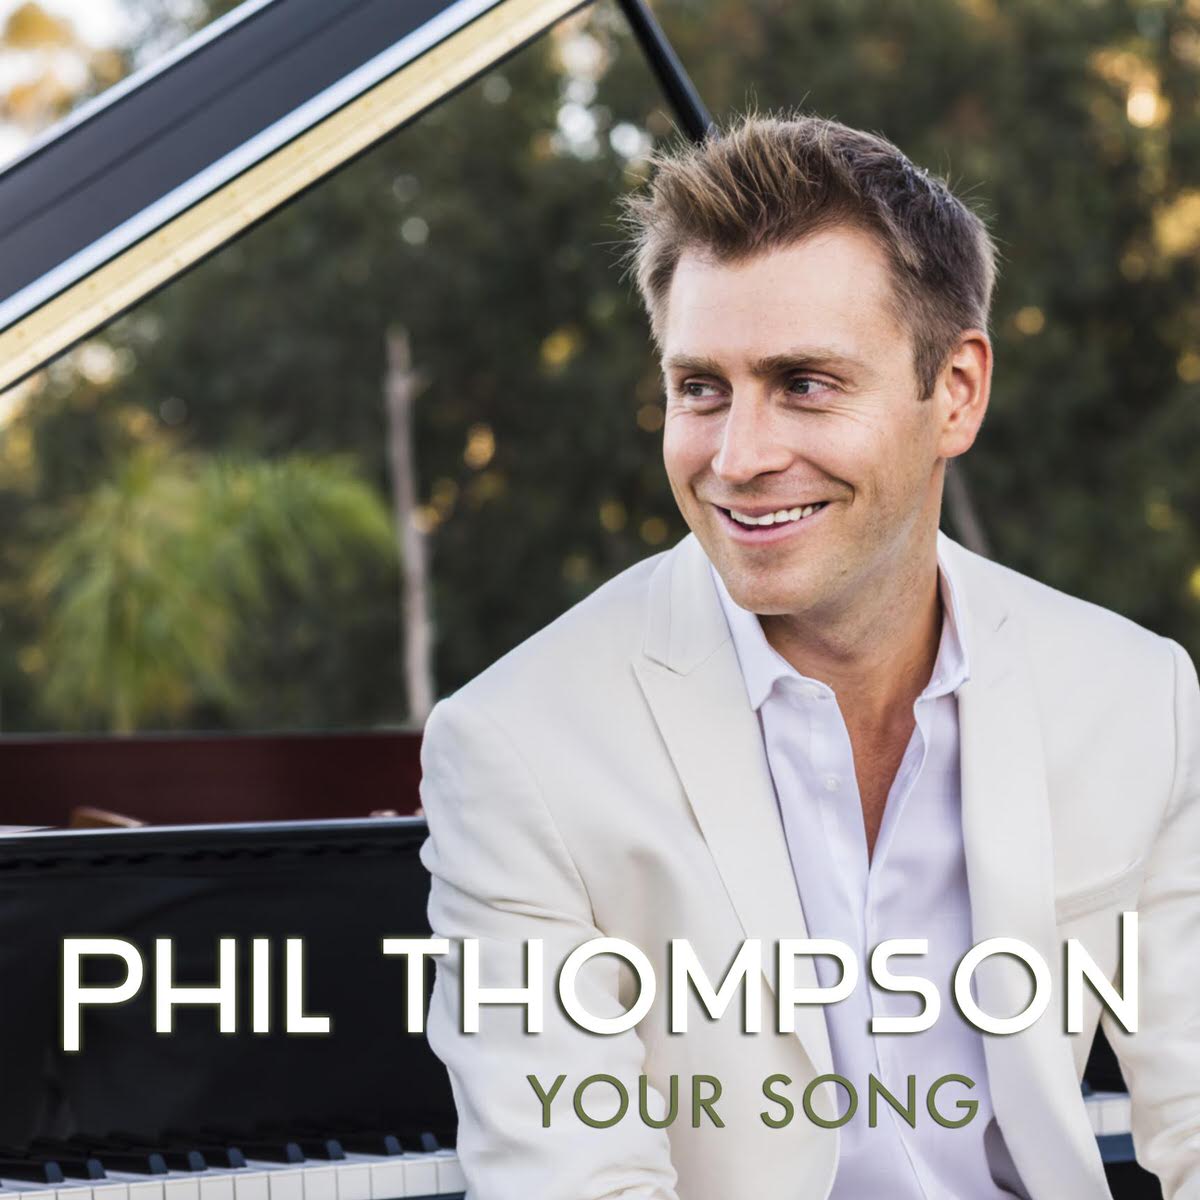 Phil Thompson sitting at Grand Piano performing Elton John's "Your Song"